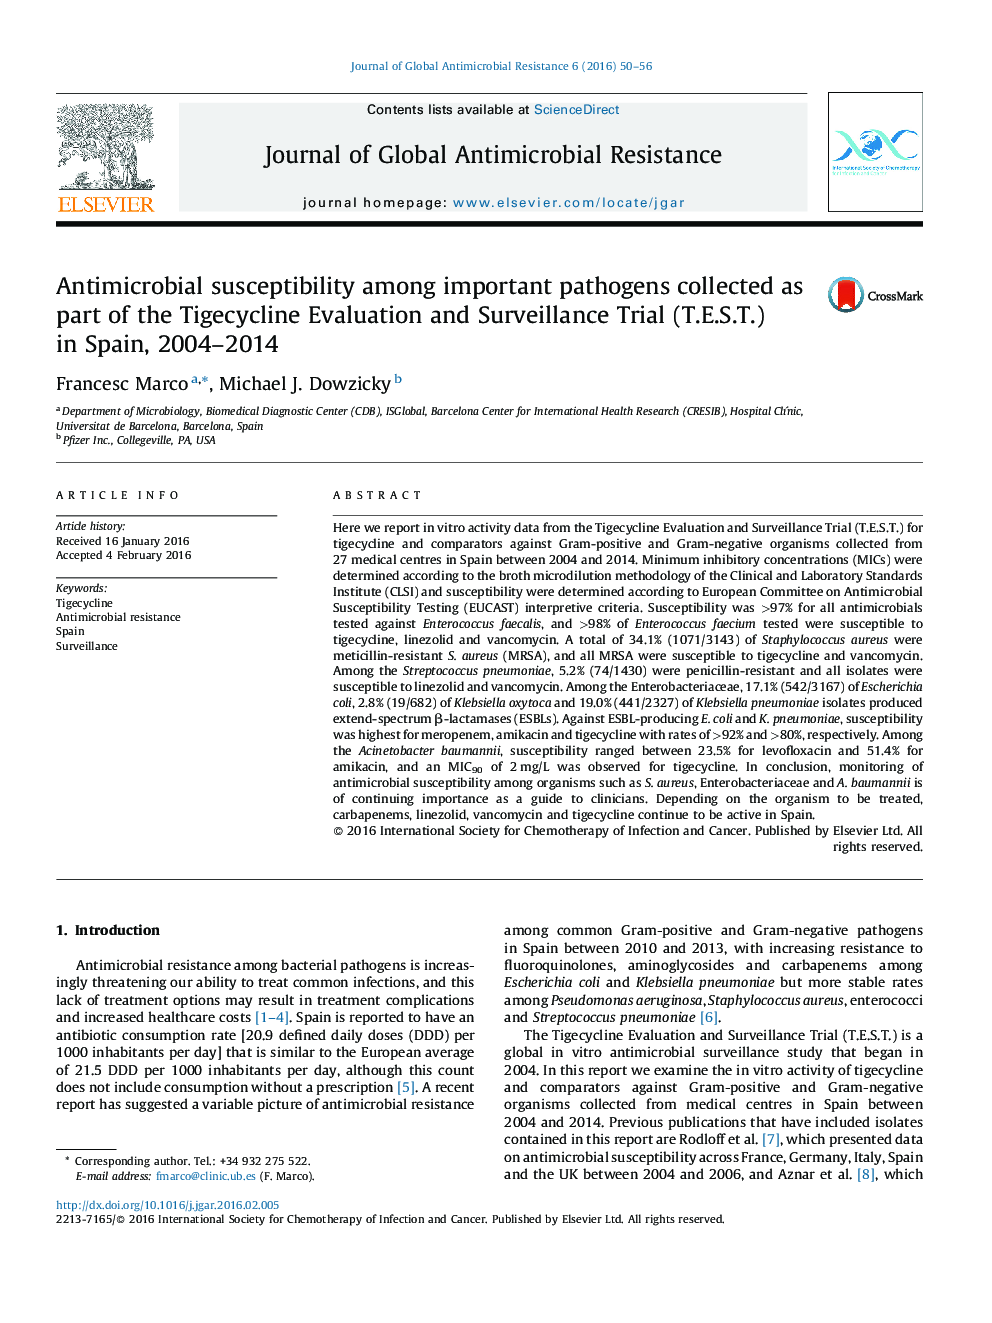 Antimicrobial susceptibility among important pathogens collected as part of the Tigecycline Evaluation and Surveillance Trial (T.E.S.T.) in Spain, 2004-2014